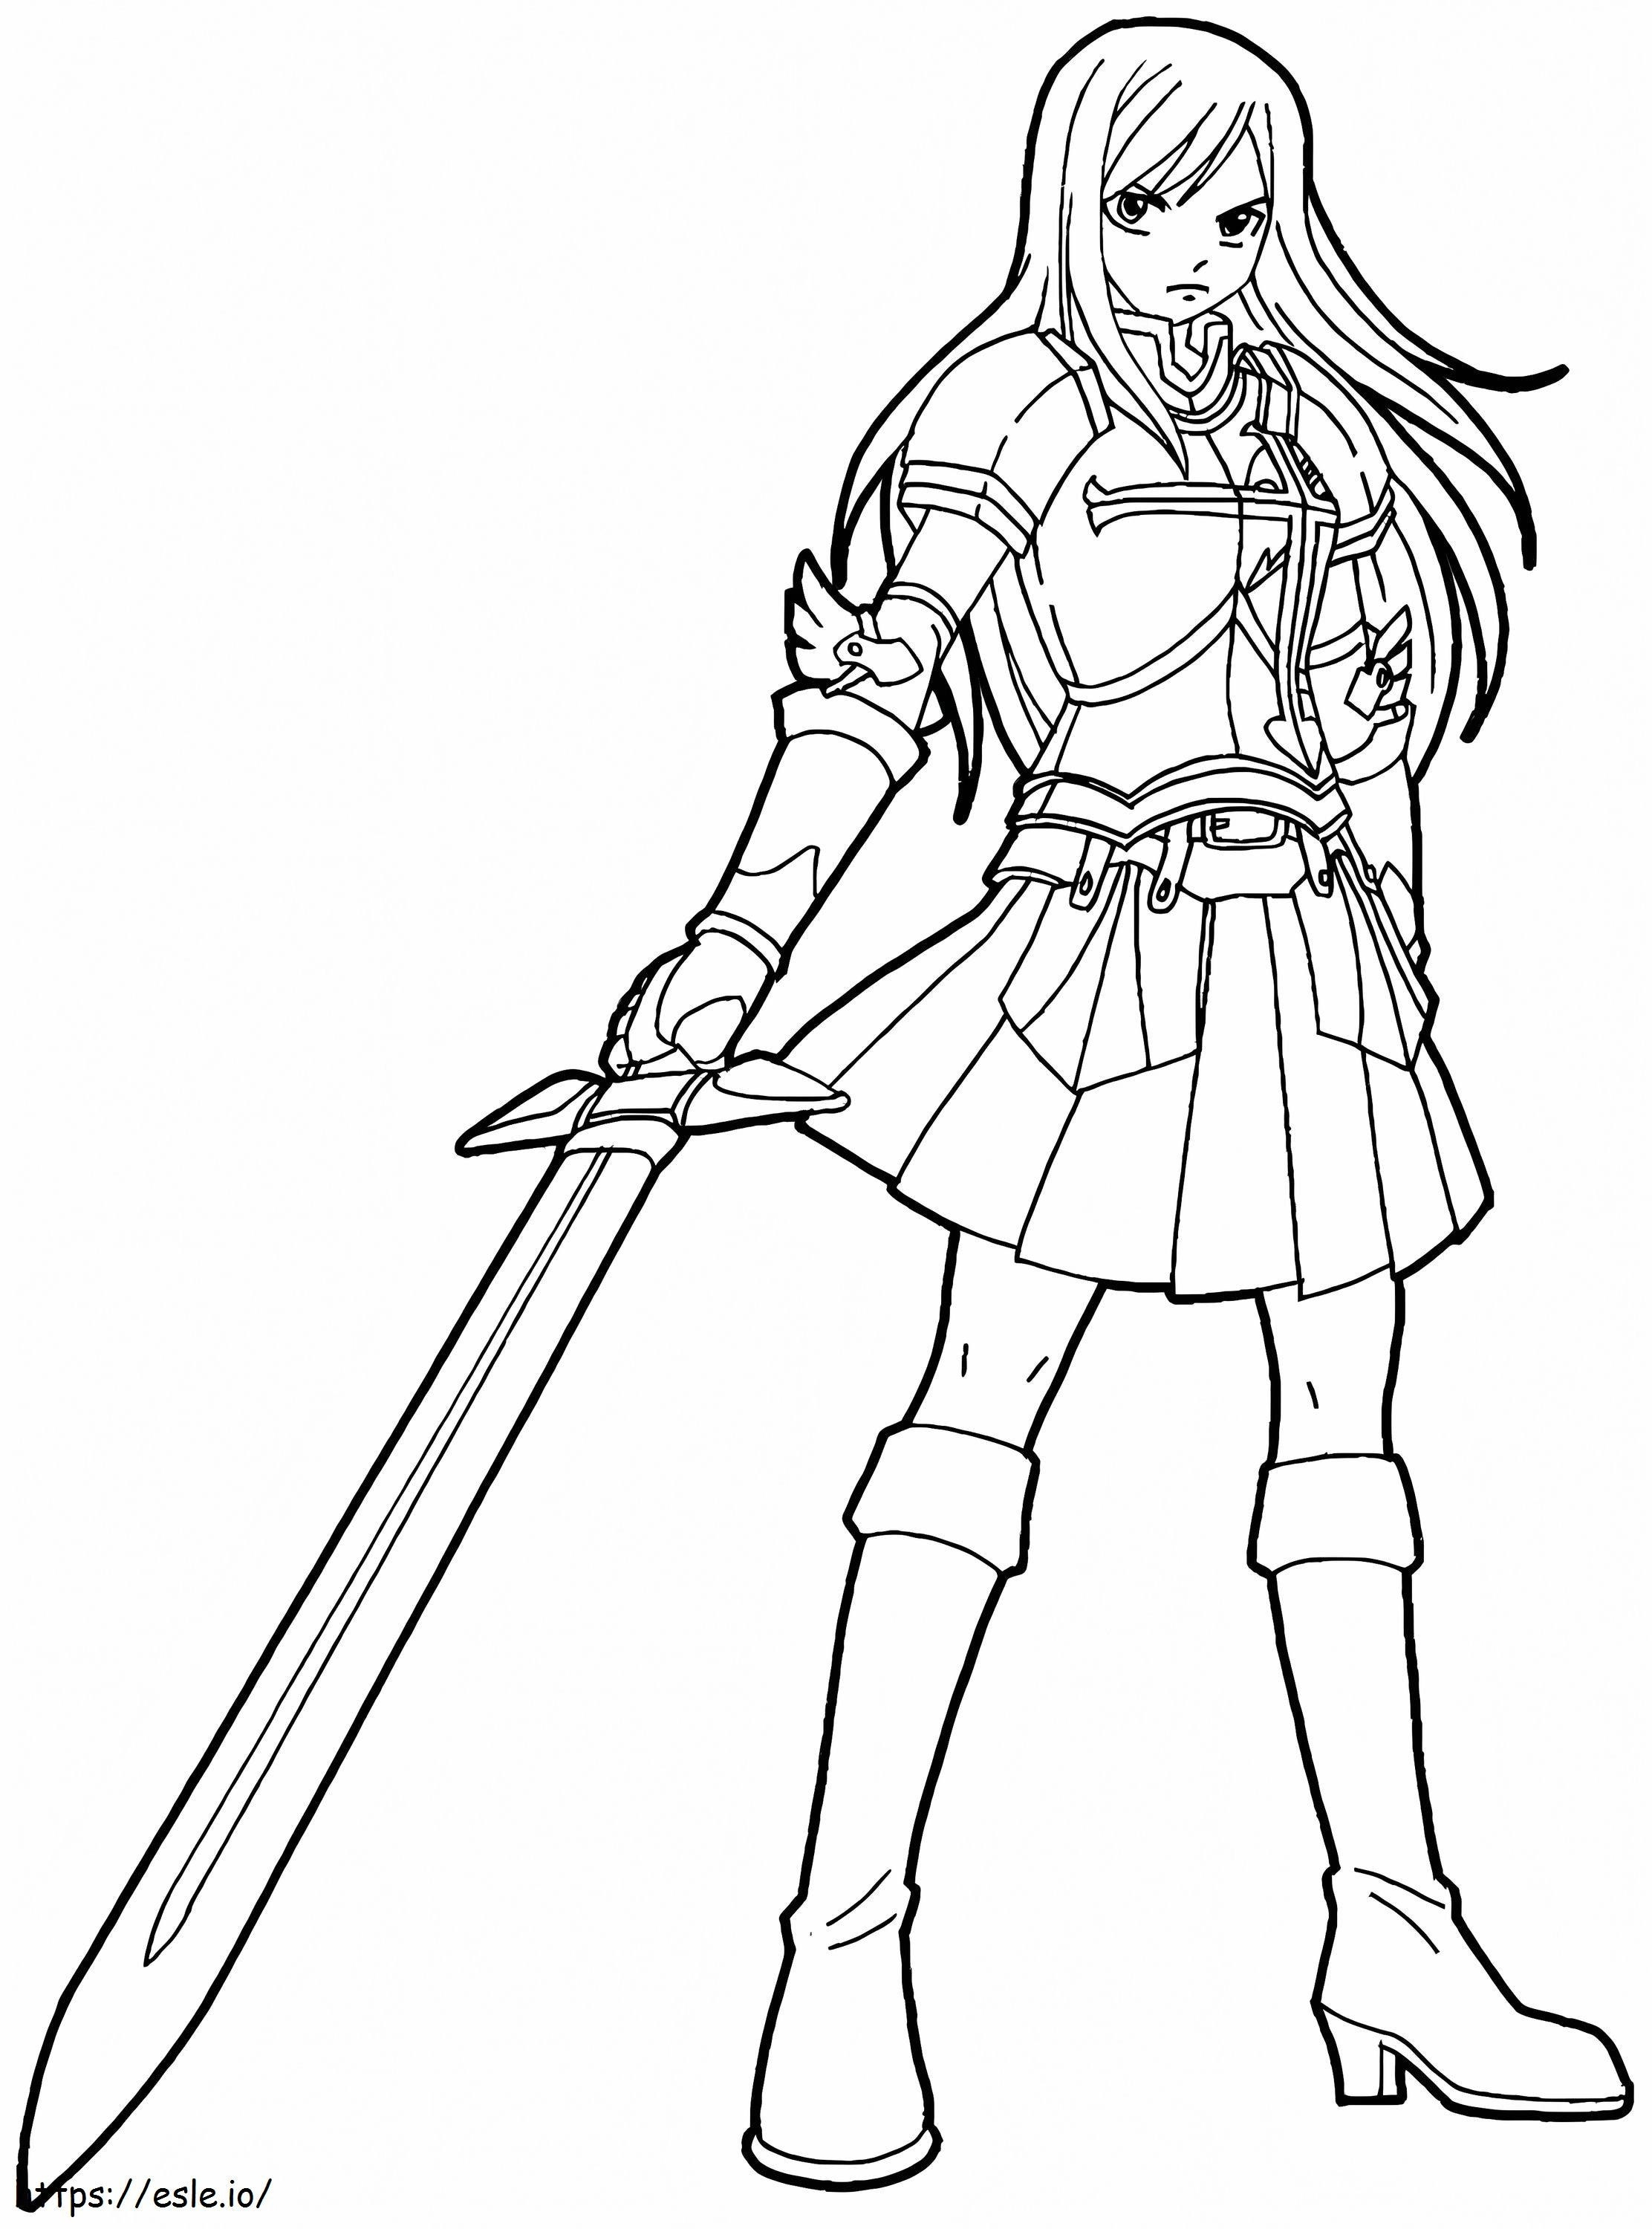 Erza Scarlet With Sword coloring page